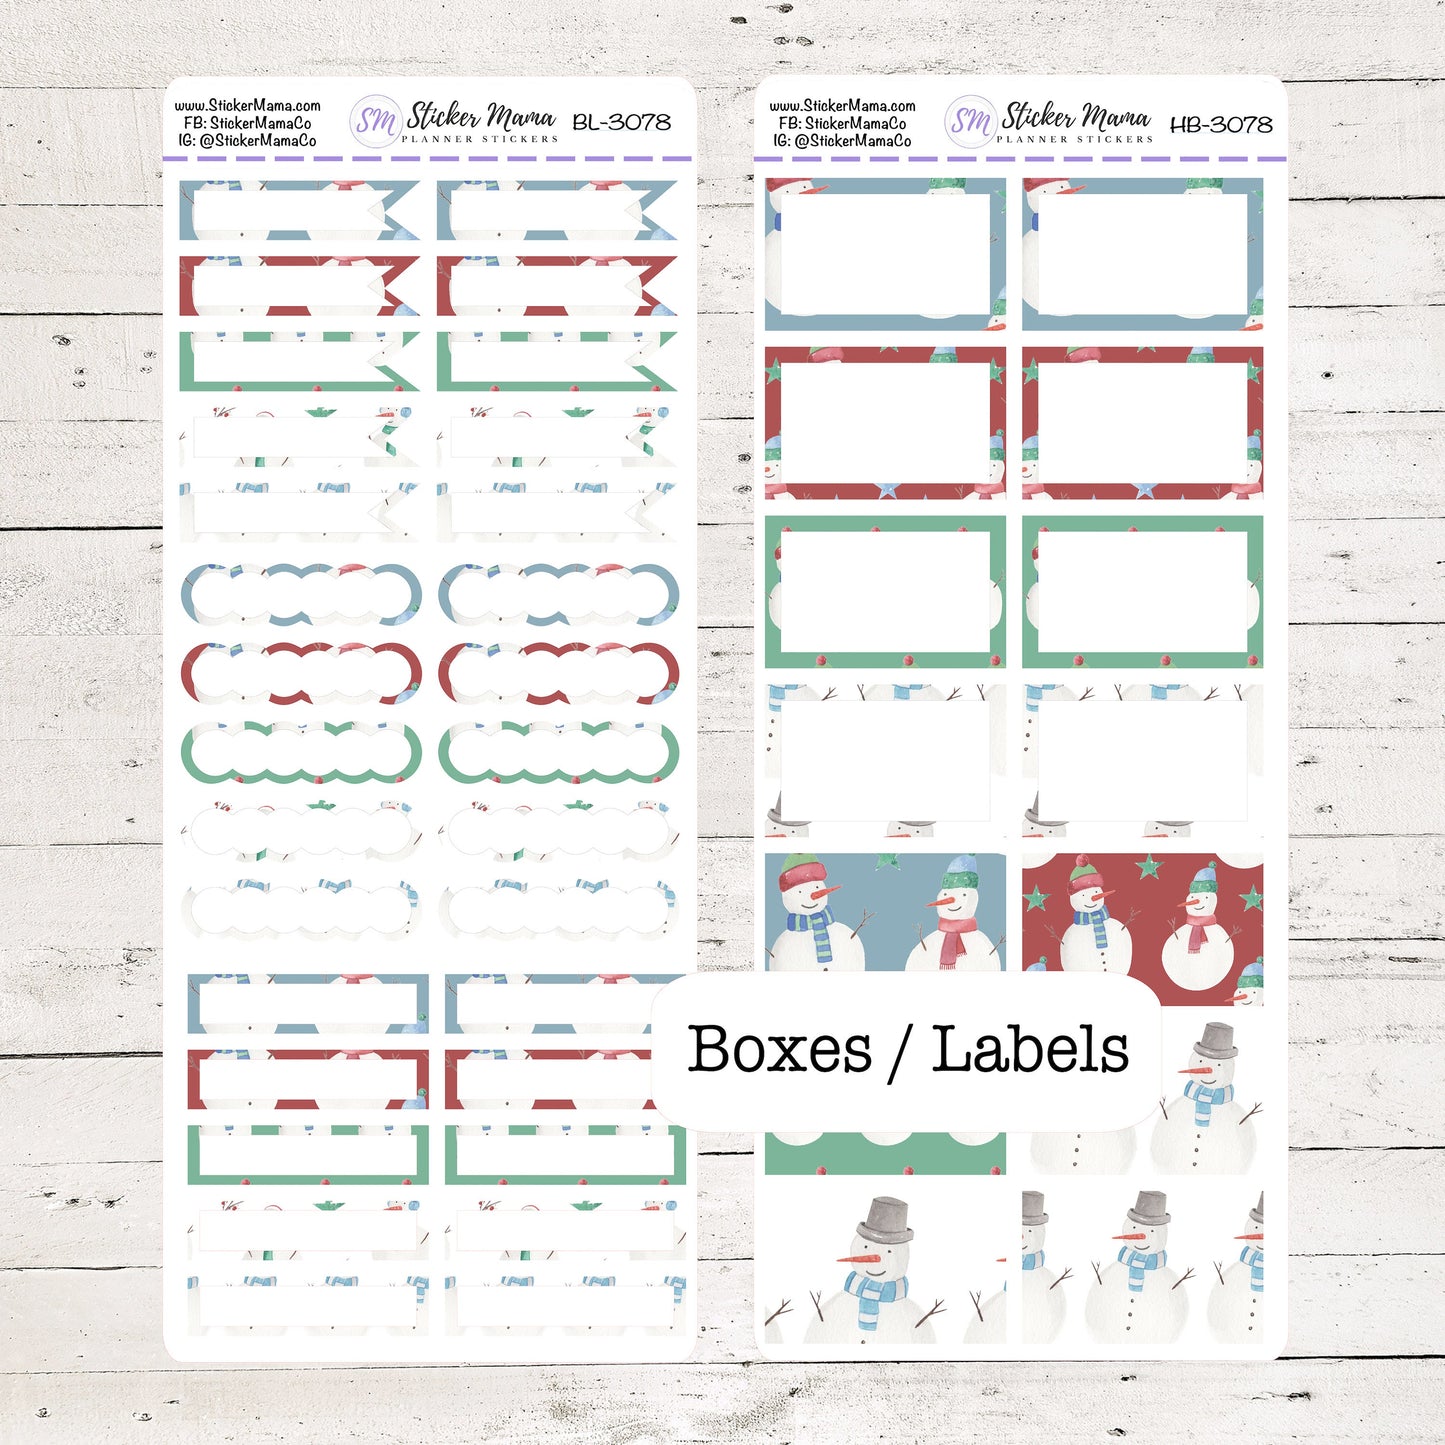 BL-3078 - HB-3078 BASIC Label Stickers - Snowmen - Half Boxes - Planner Stickers - Full Box for Planners